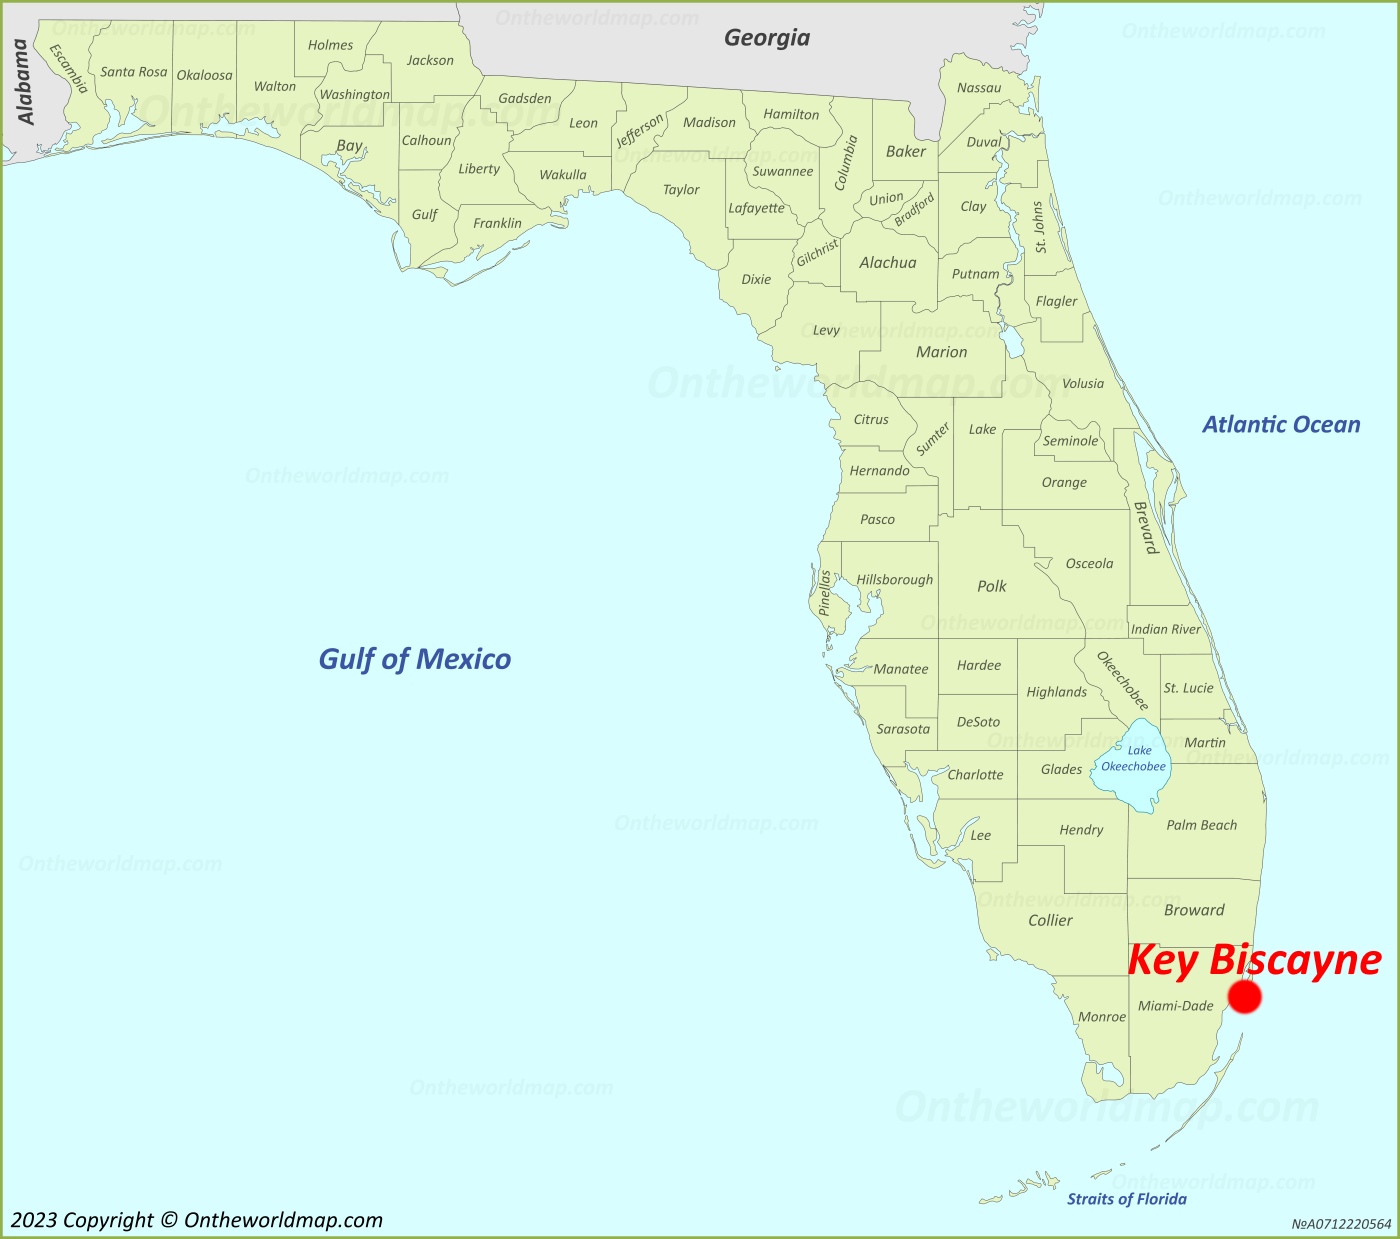 Key Biscayne Location On The Florida Map